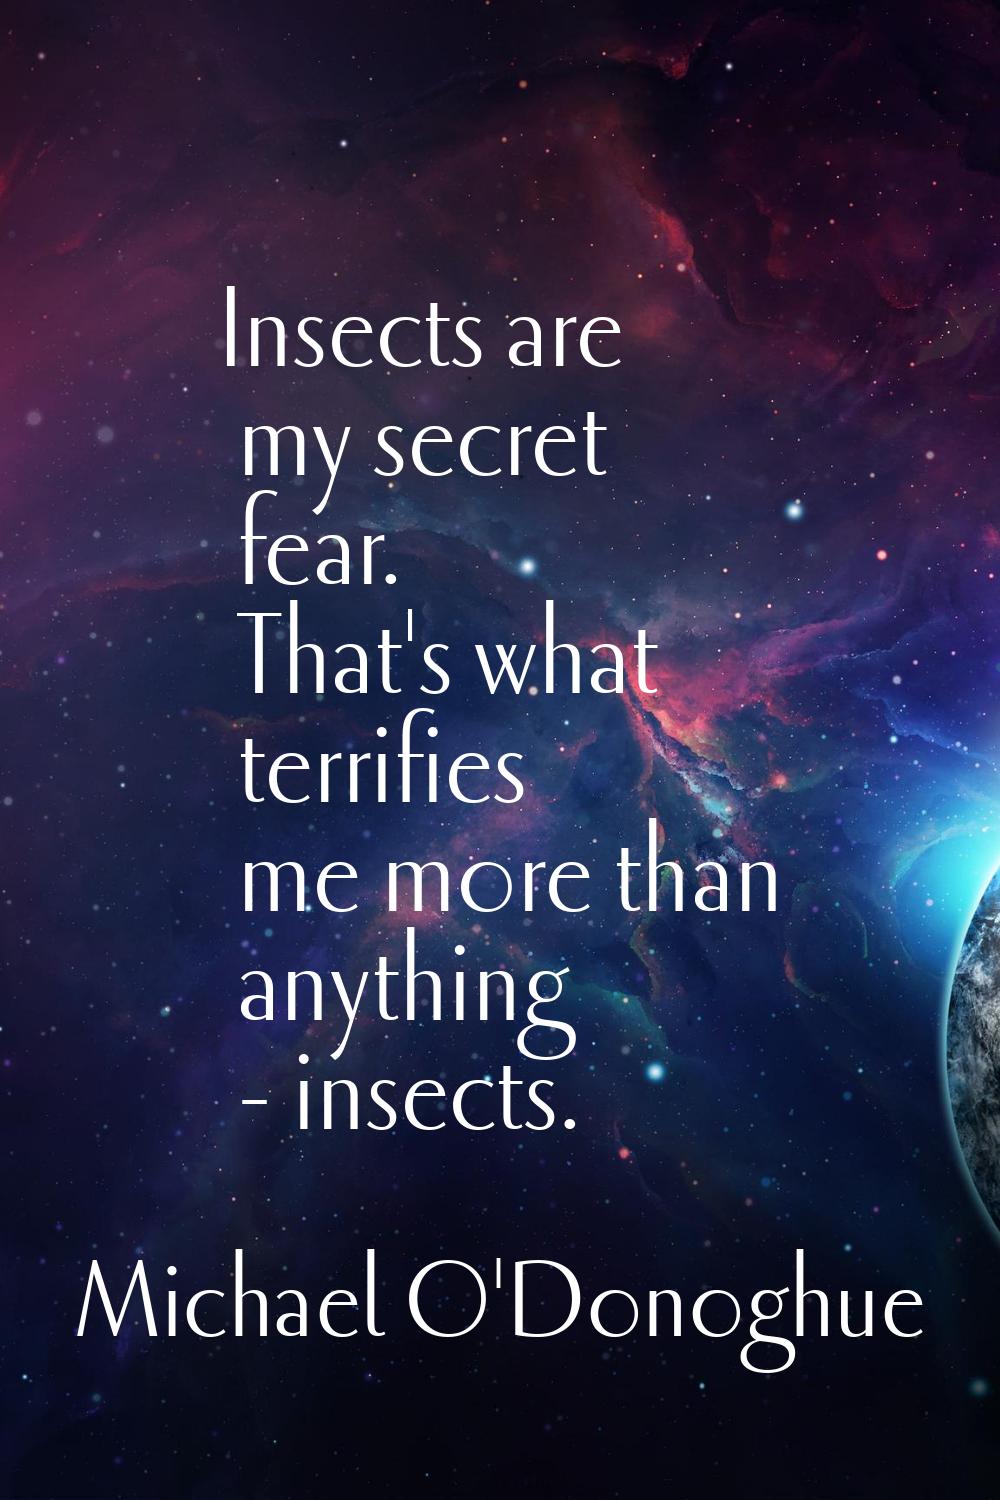 Insects are my secret fear. That's what terrifies me more than anything - insects.